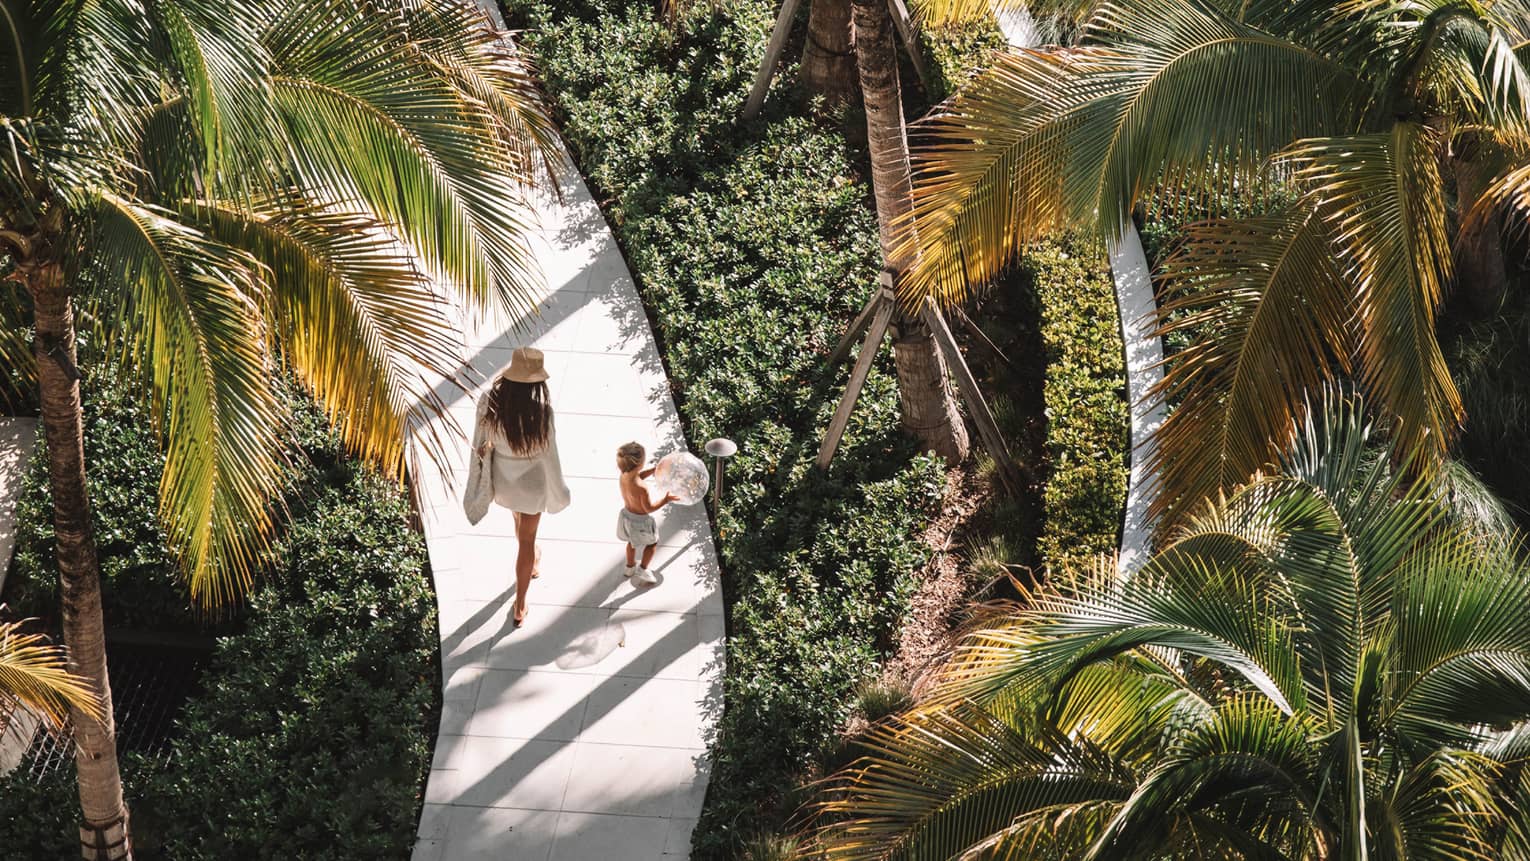 A woman and child walking along a path surrounded by plants and trees.